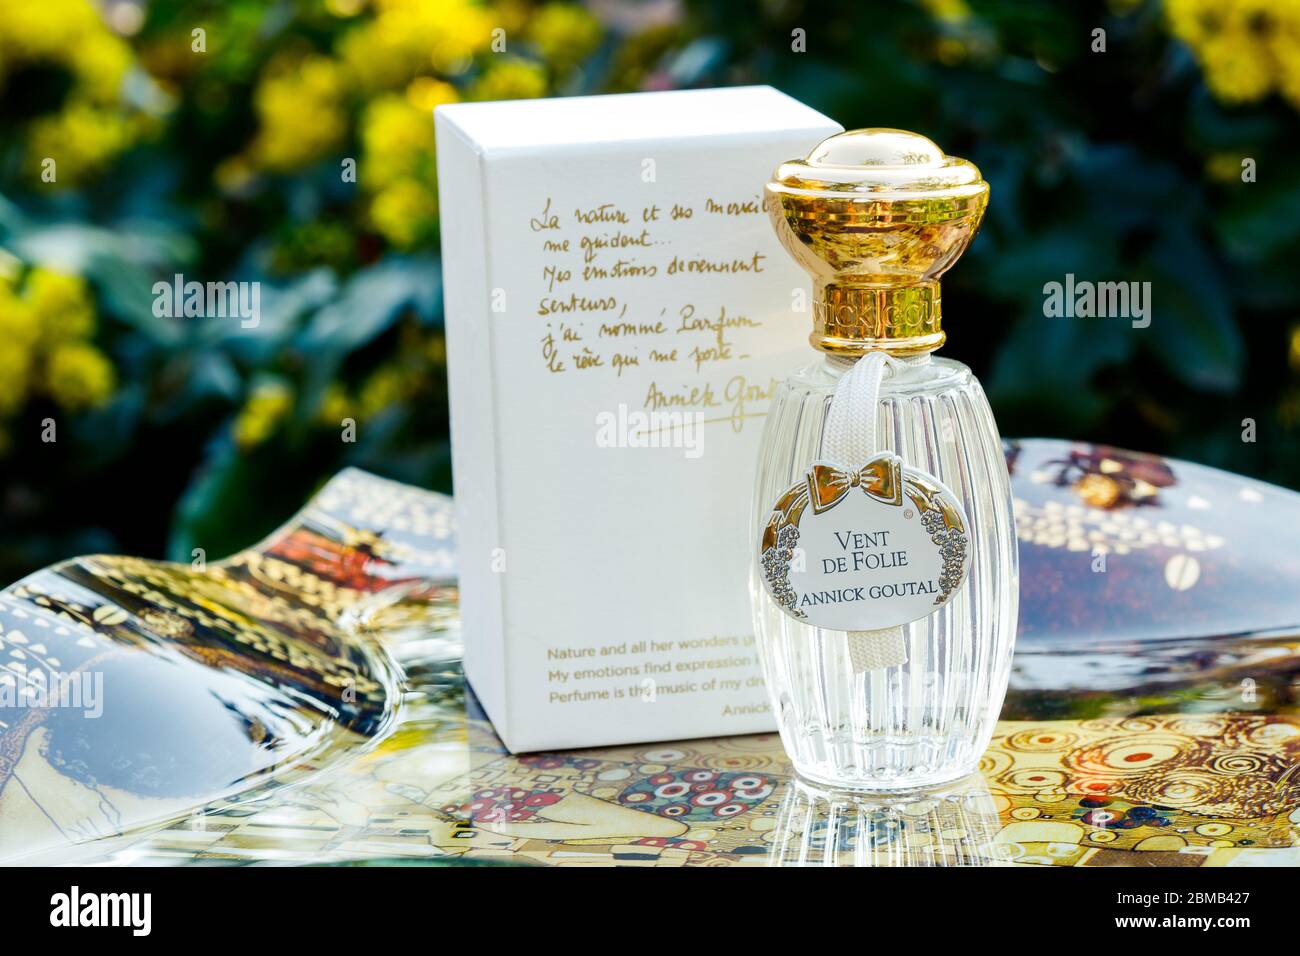 PARIS, FRANCE -5 MAY 2020 - Perfume bottles at an Annick Goutal fragrance store in Paris. Stock Photo